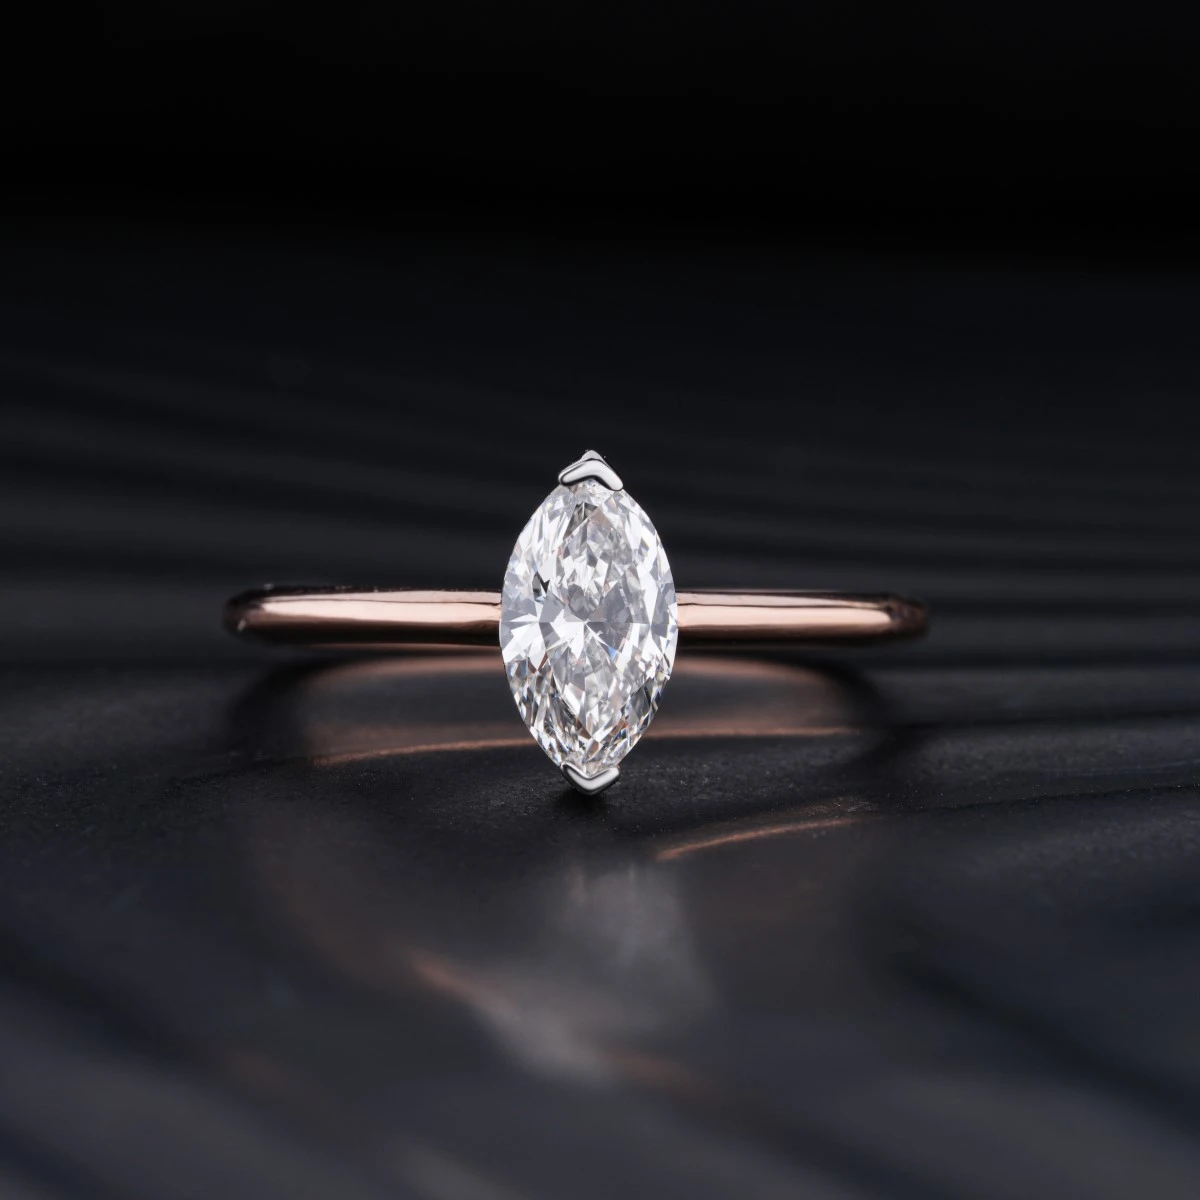 Marquise Solitaire Engagement Ring | Marquise Solitaire Engagement Ring | Marquise Cut Diamond Solitaire Ring | Earthly Jewels